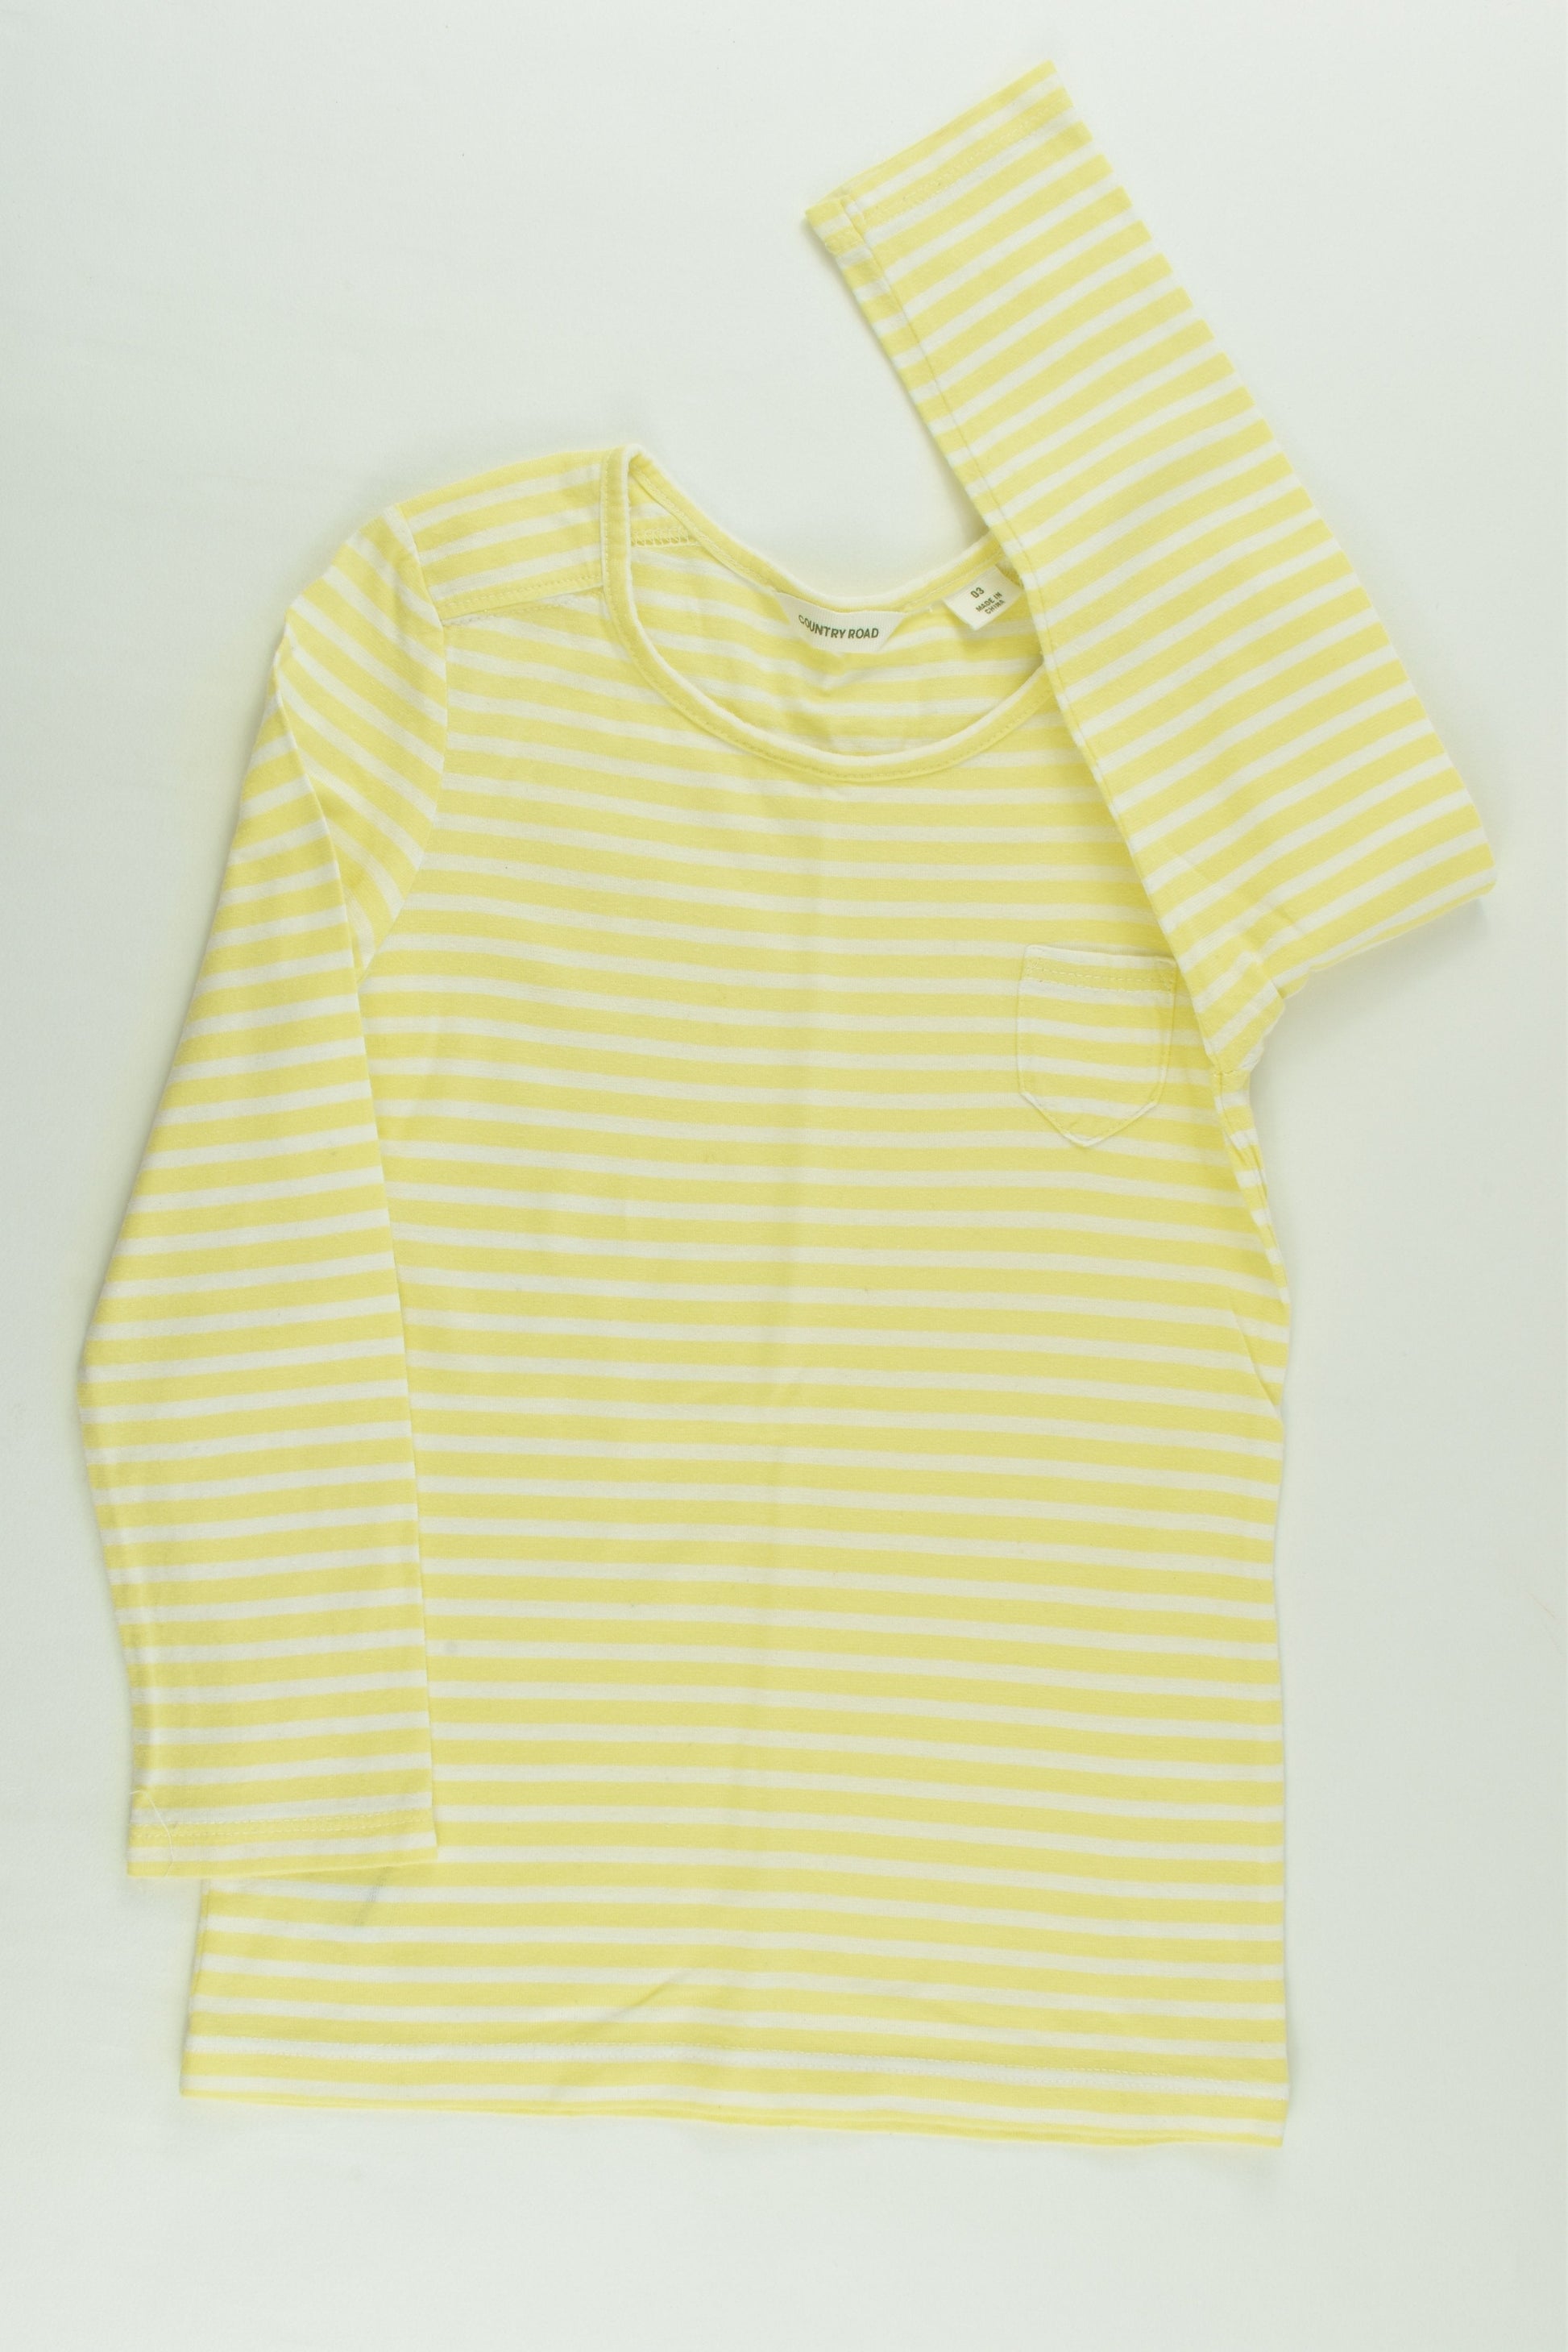 Country Road Size 3 Striped Top